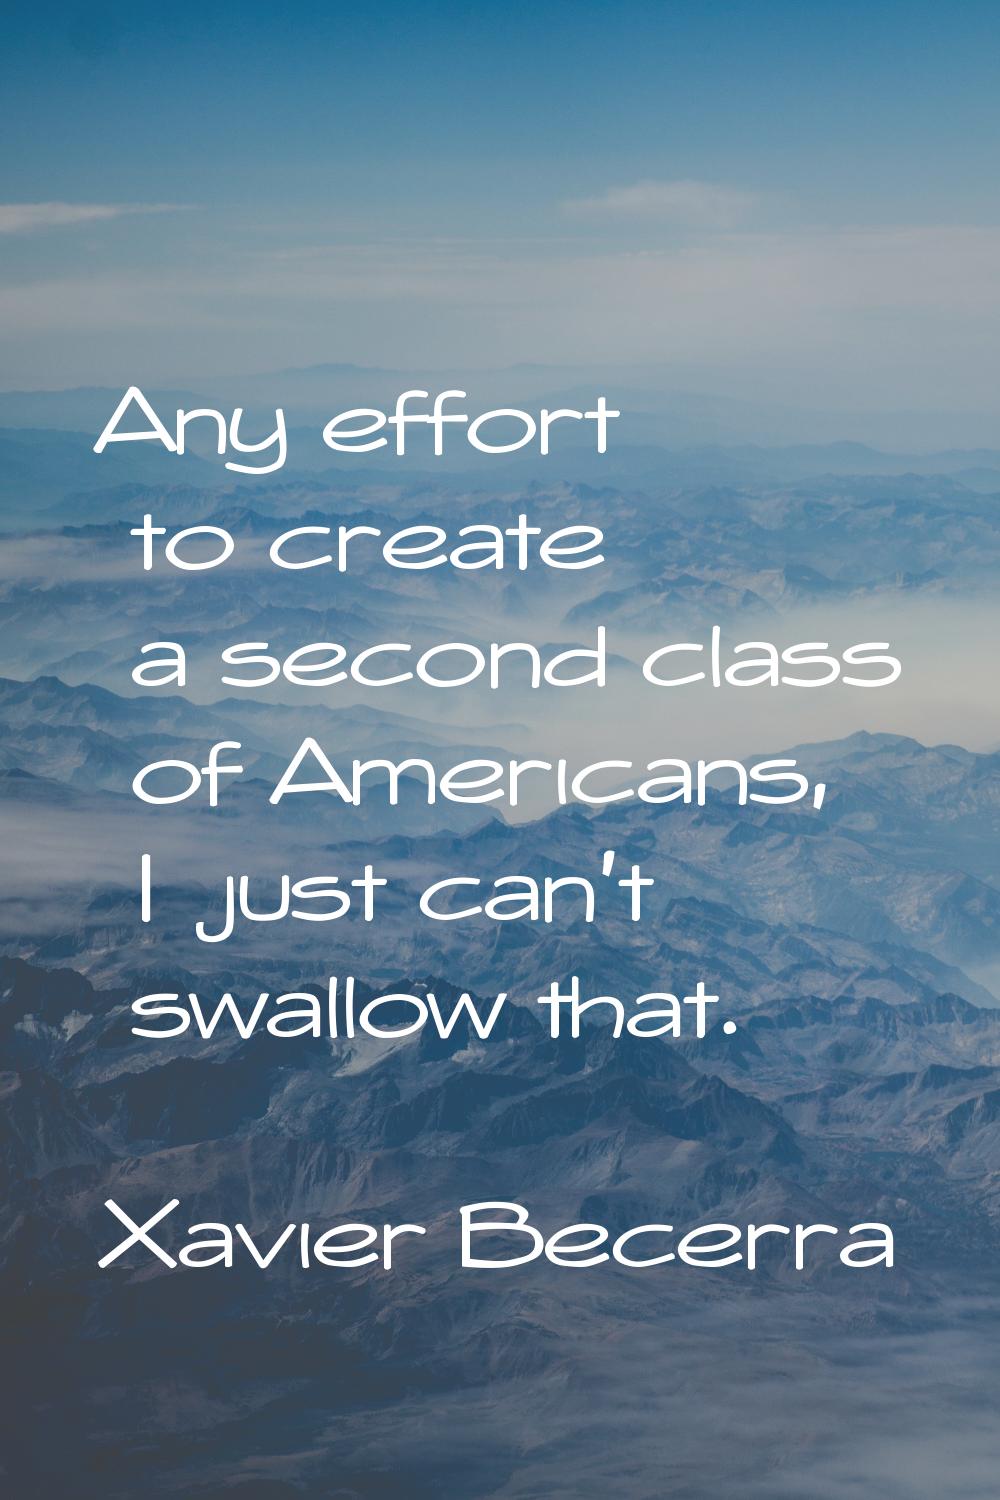 Any effort to create a second class of Americans, I just can't swallow that.